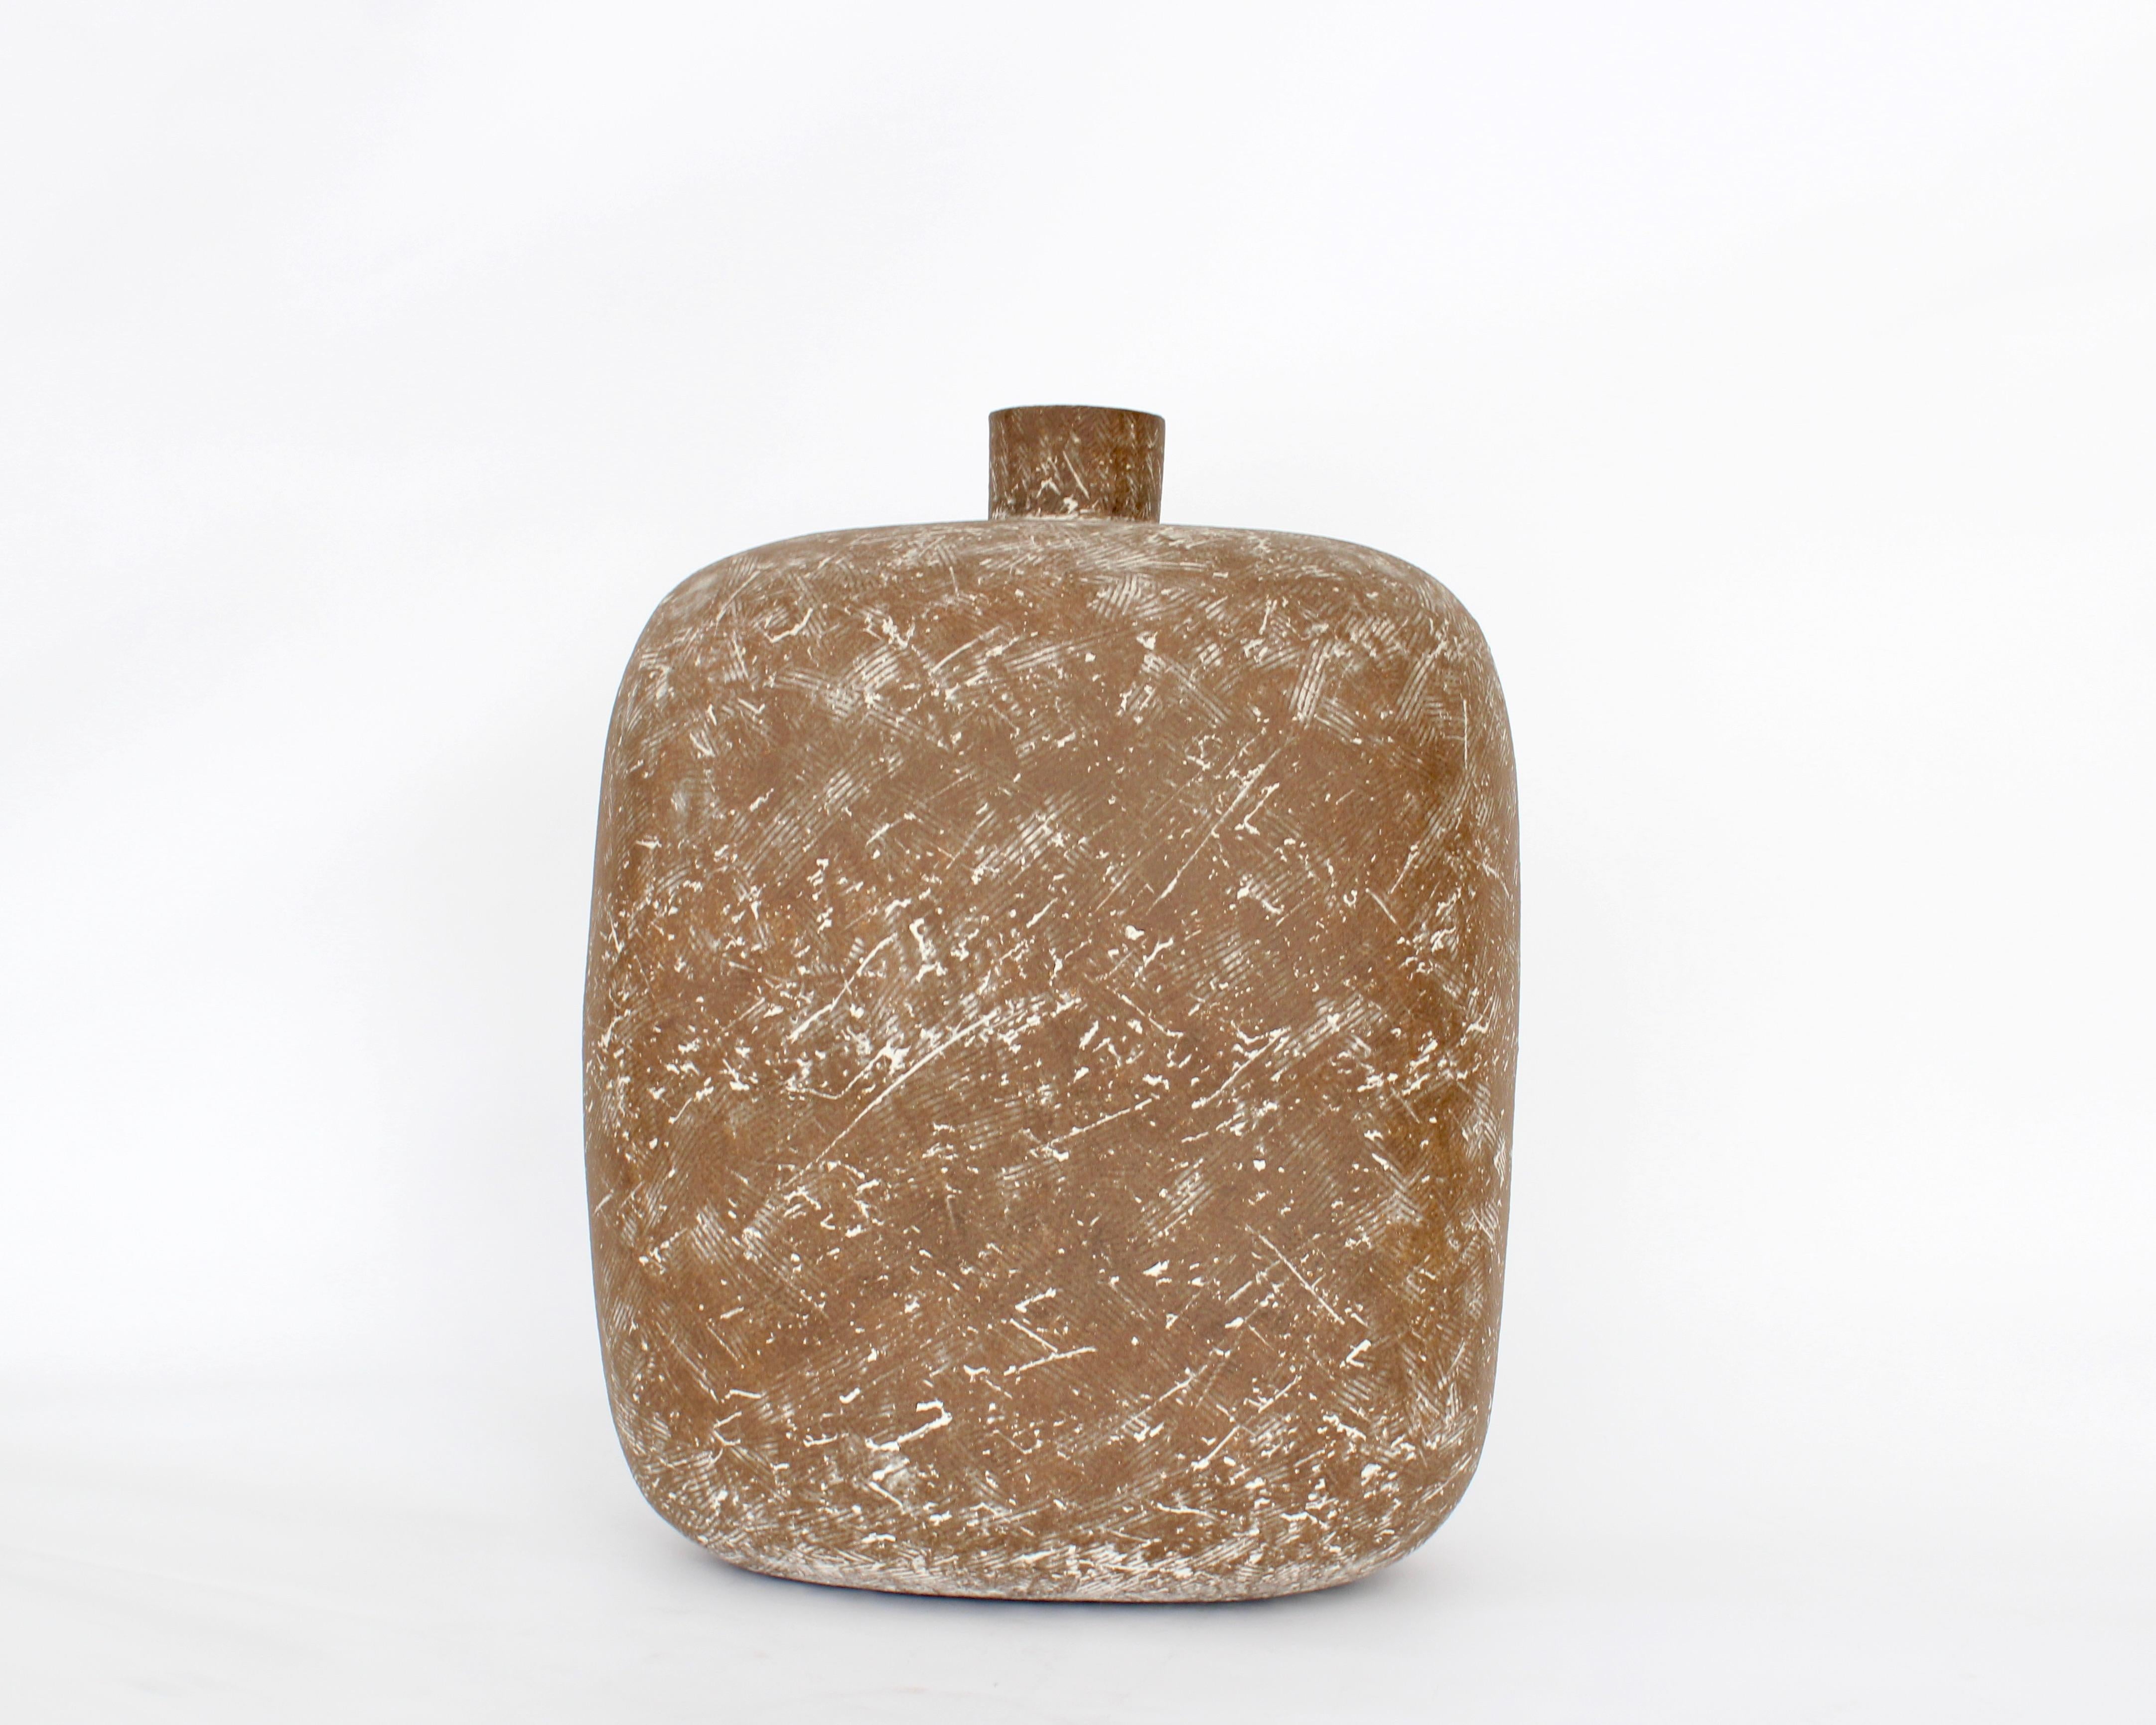 Claude Conover large ceramic vessel titled Okkintok. 
This stoneware vase is glazed in two different tones and finely decorated with Conover's signature one iconic markings.
Classic and contemporary in form, this bold and unique ceramic vessel has